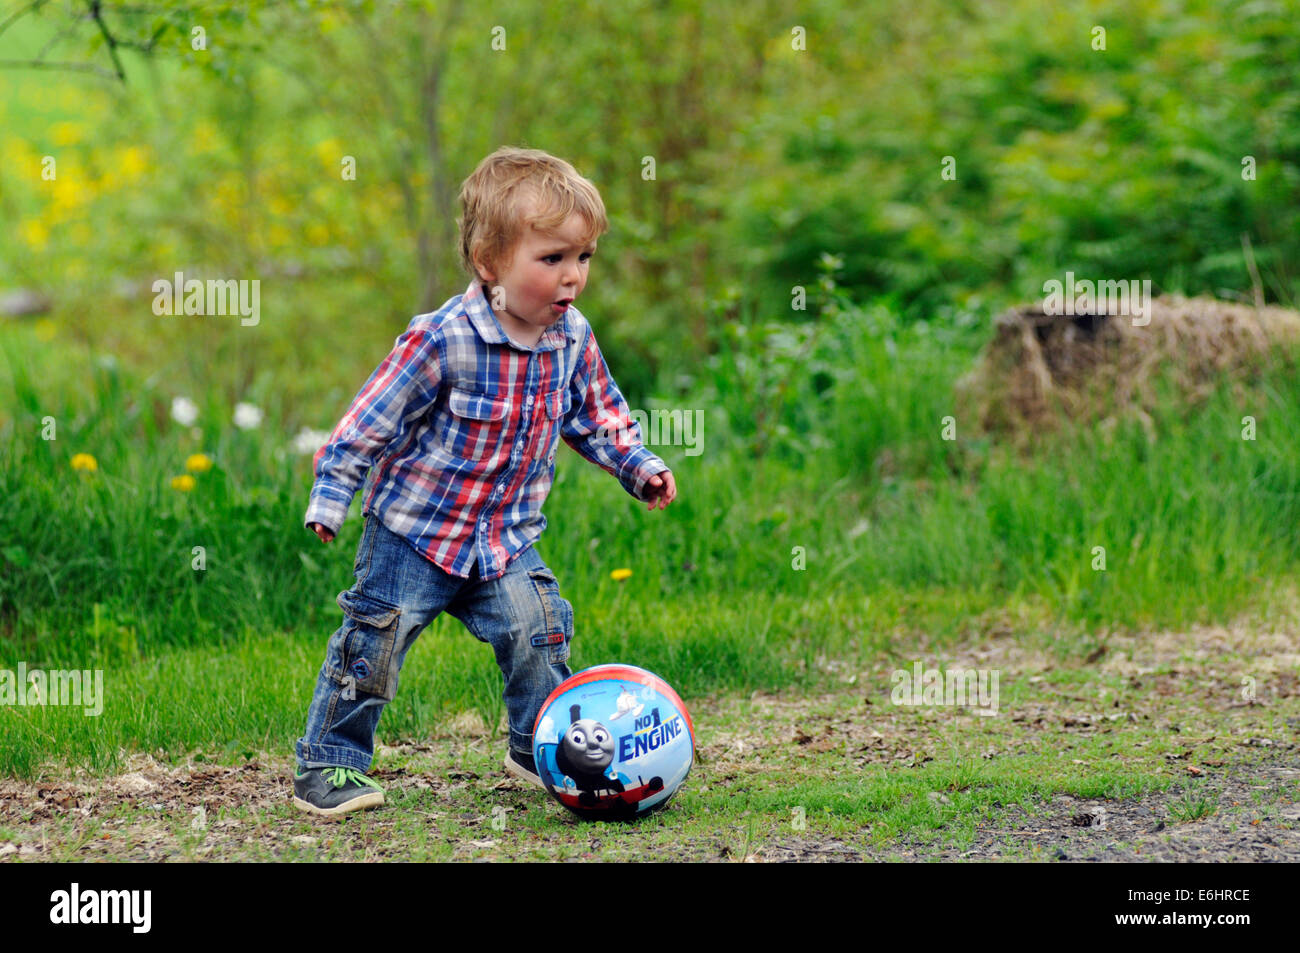 A young boy playing with a ball Stock Photo